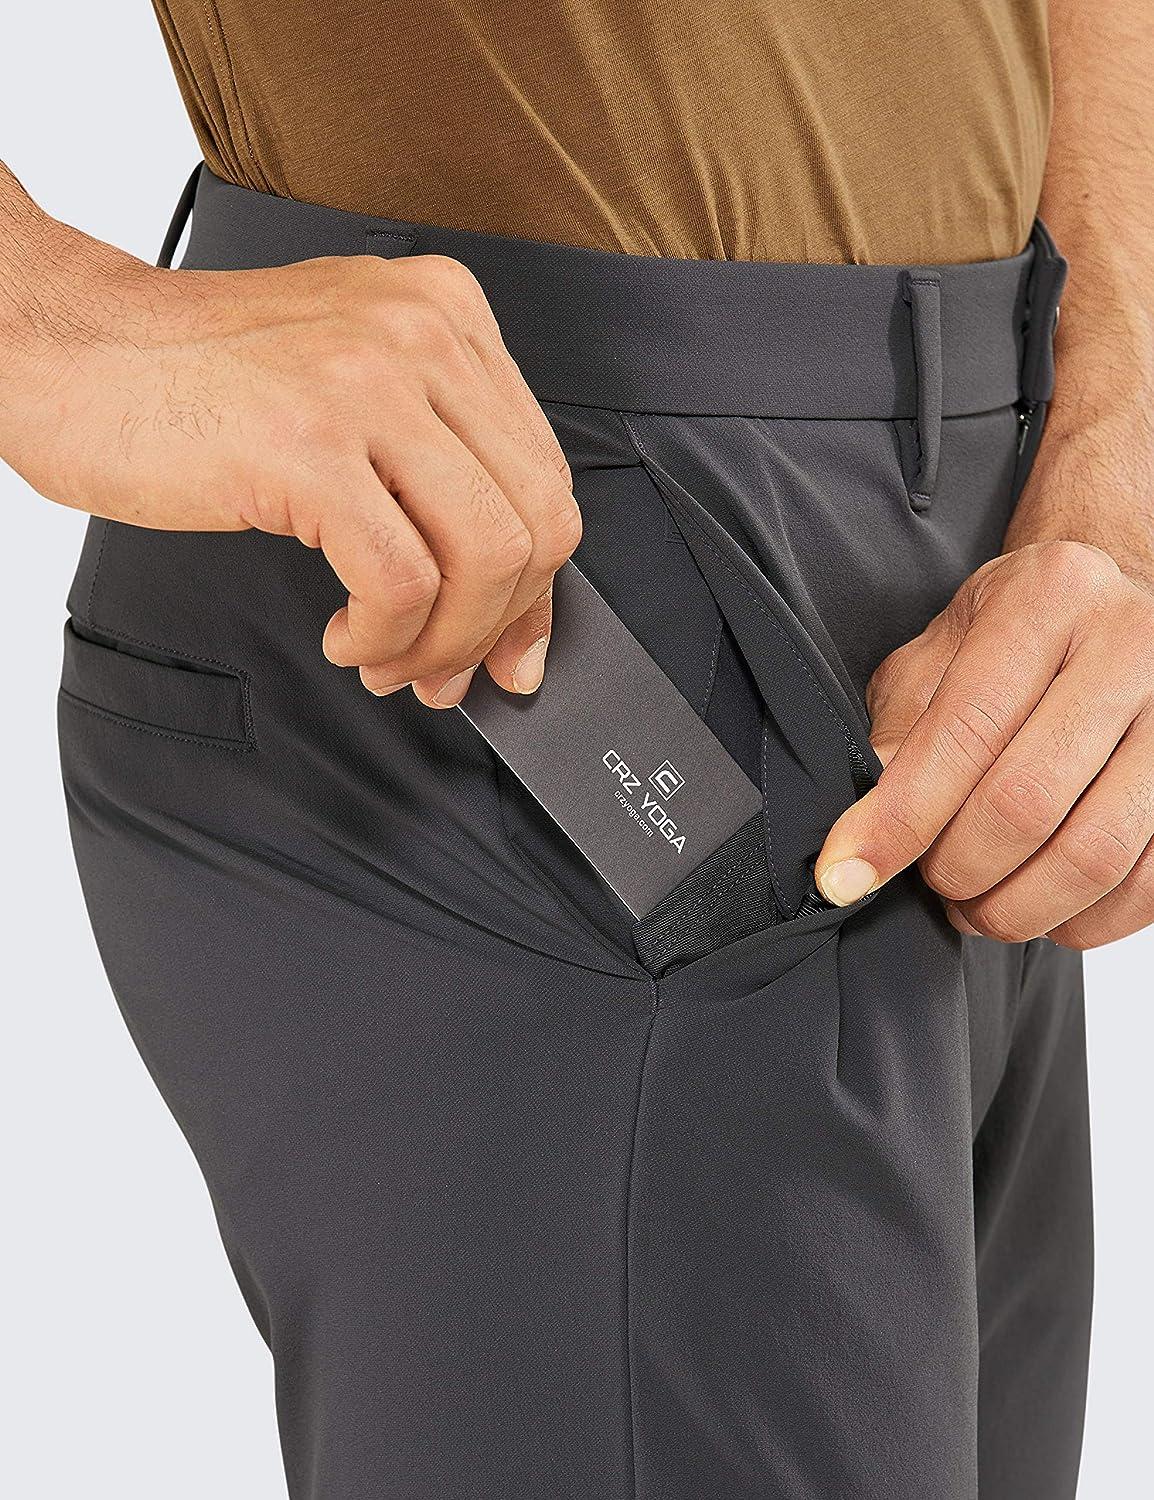 CRZ YOGA All-day Comfort Men's Classic-Fit 30 Inches Golf Pants Quick Dry